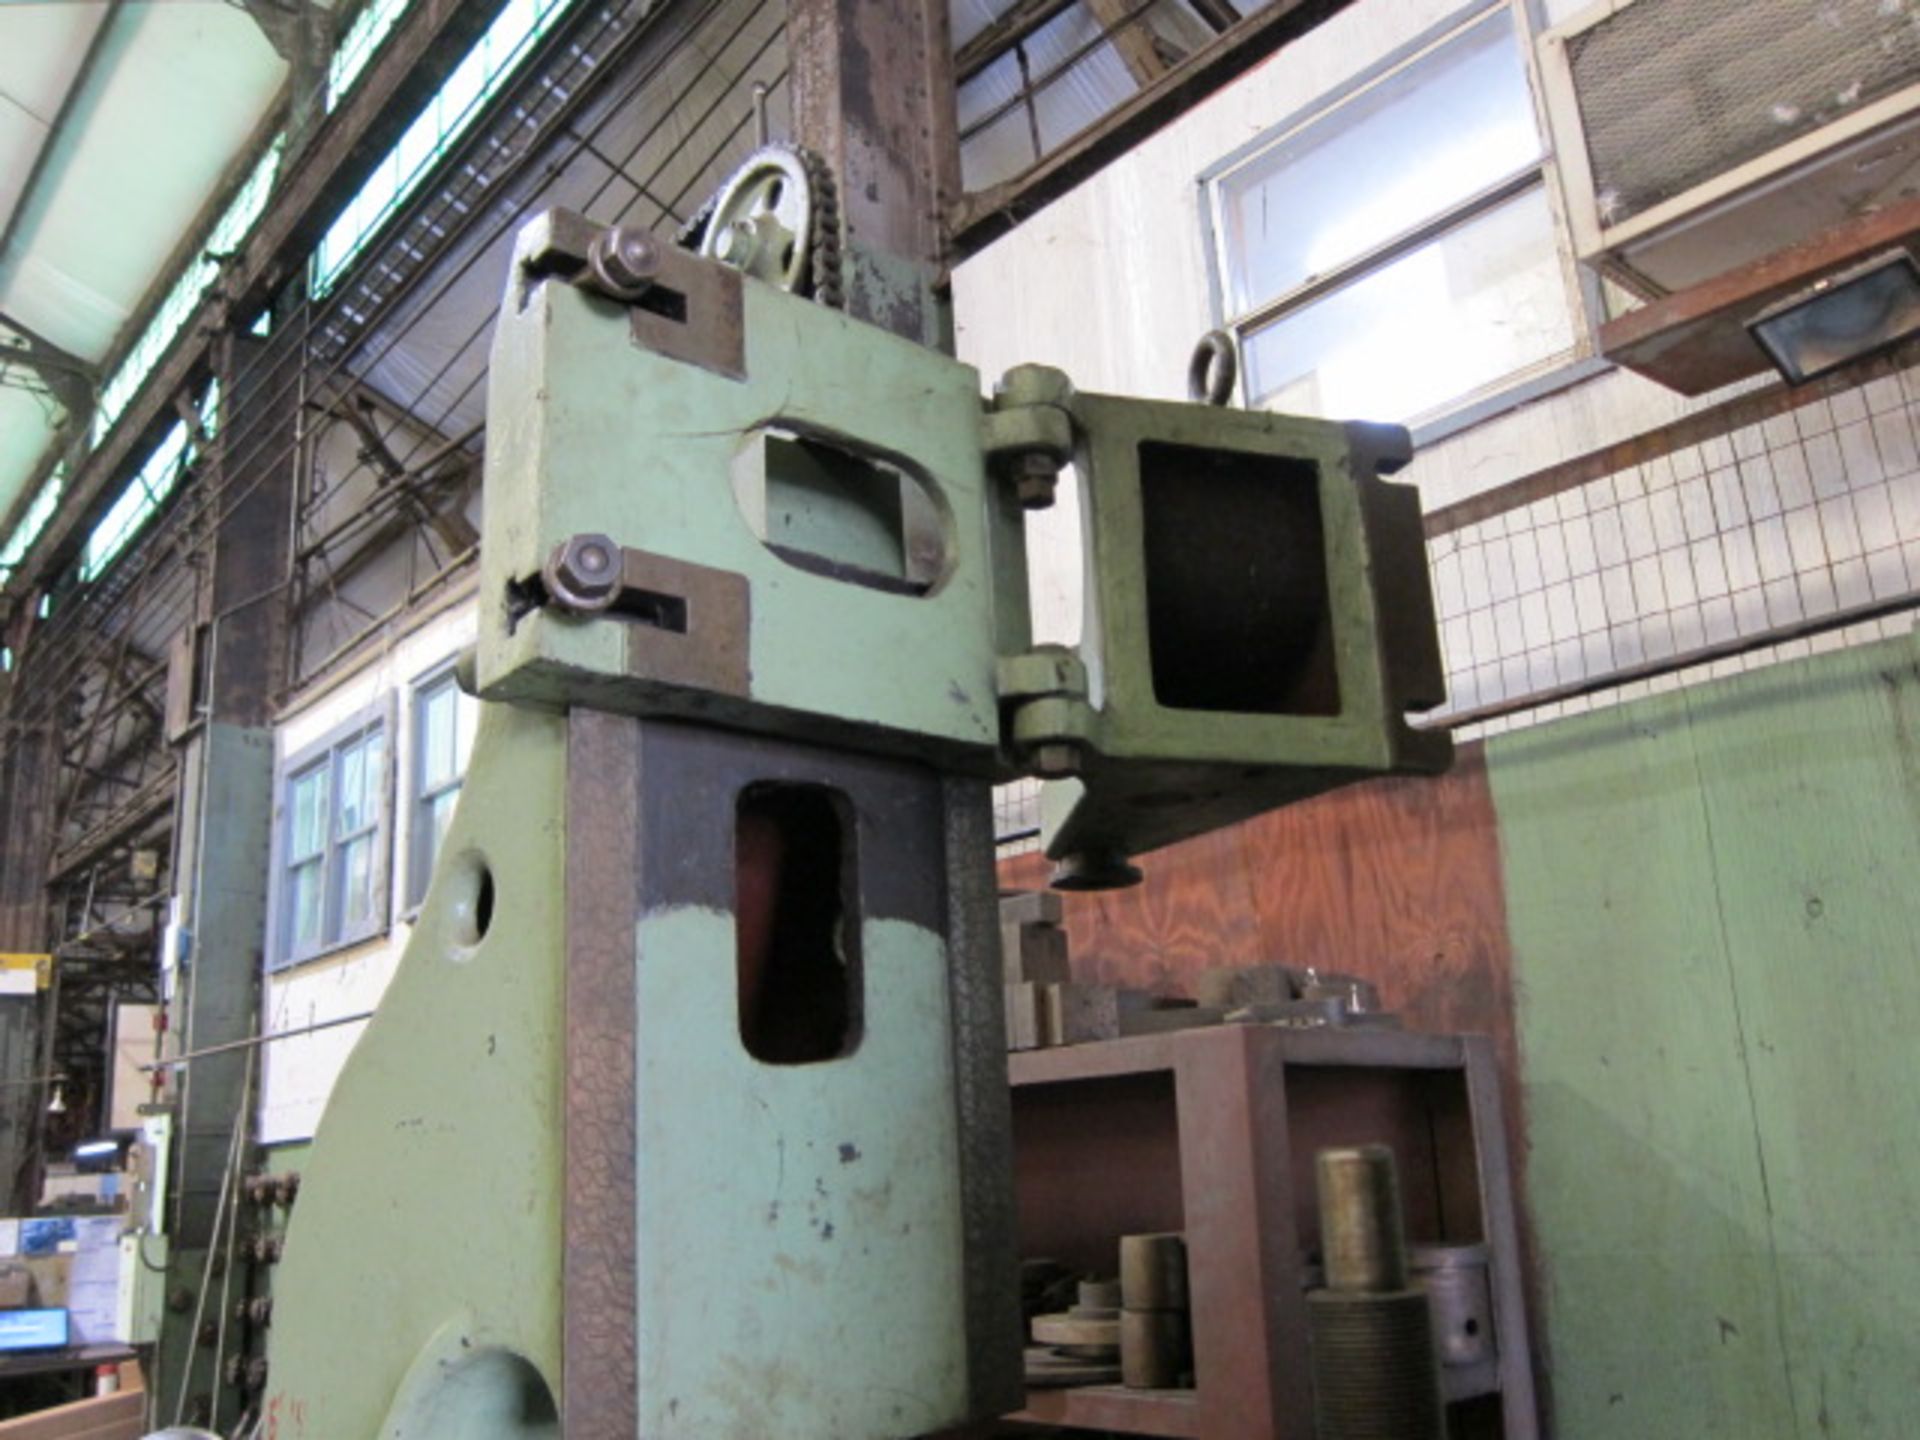 GEAR HOBBER, GOULD & EBERHARDT 72” MDL. 72H, 18” face width, 36” table dia., tailstock, coolant - Image 5 of 6